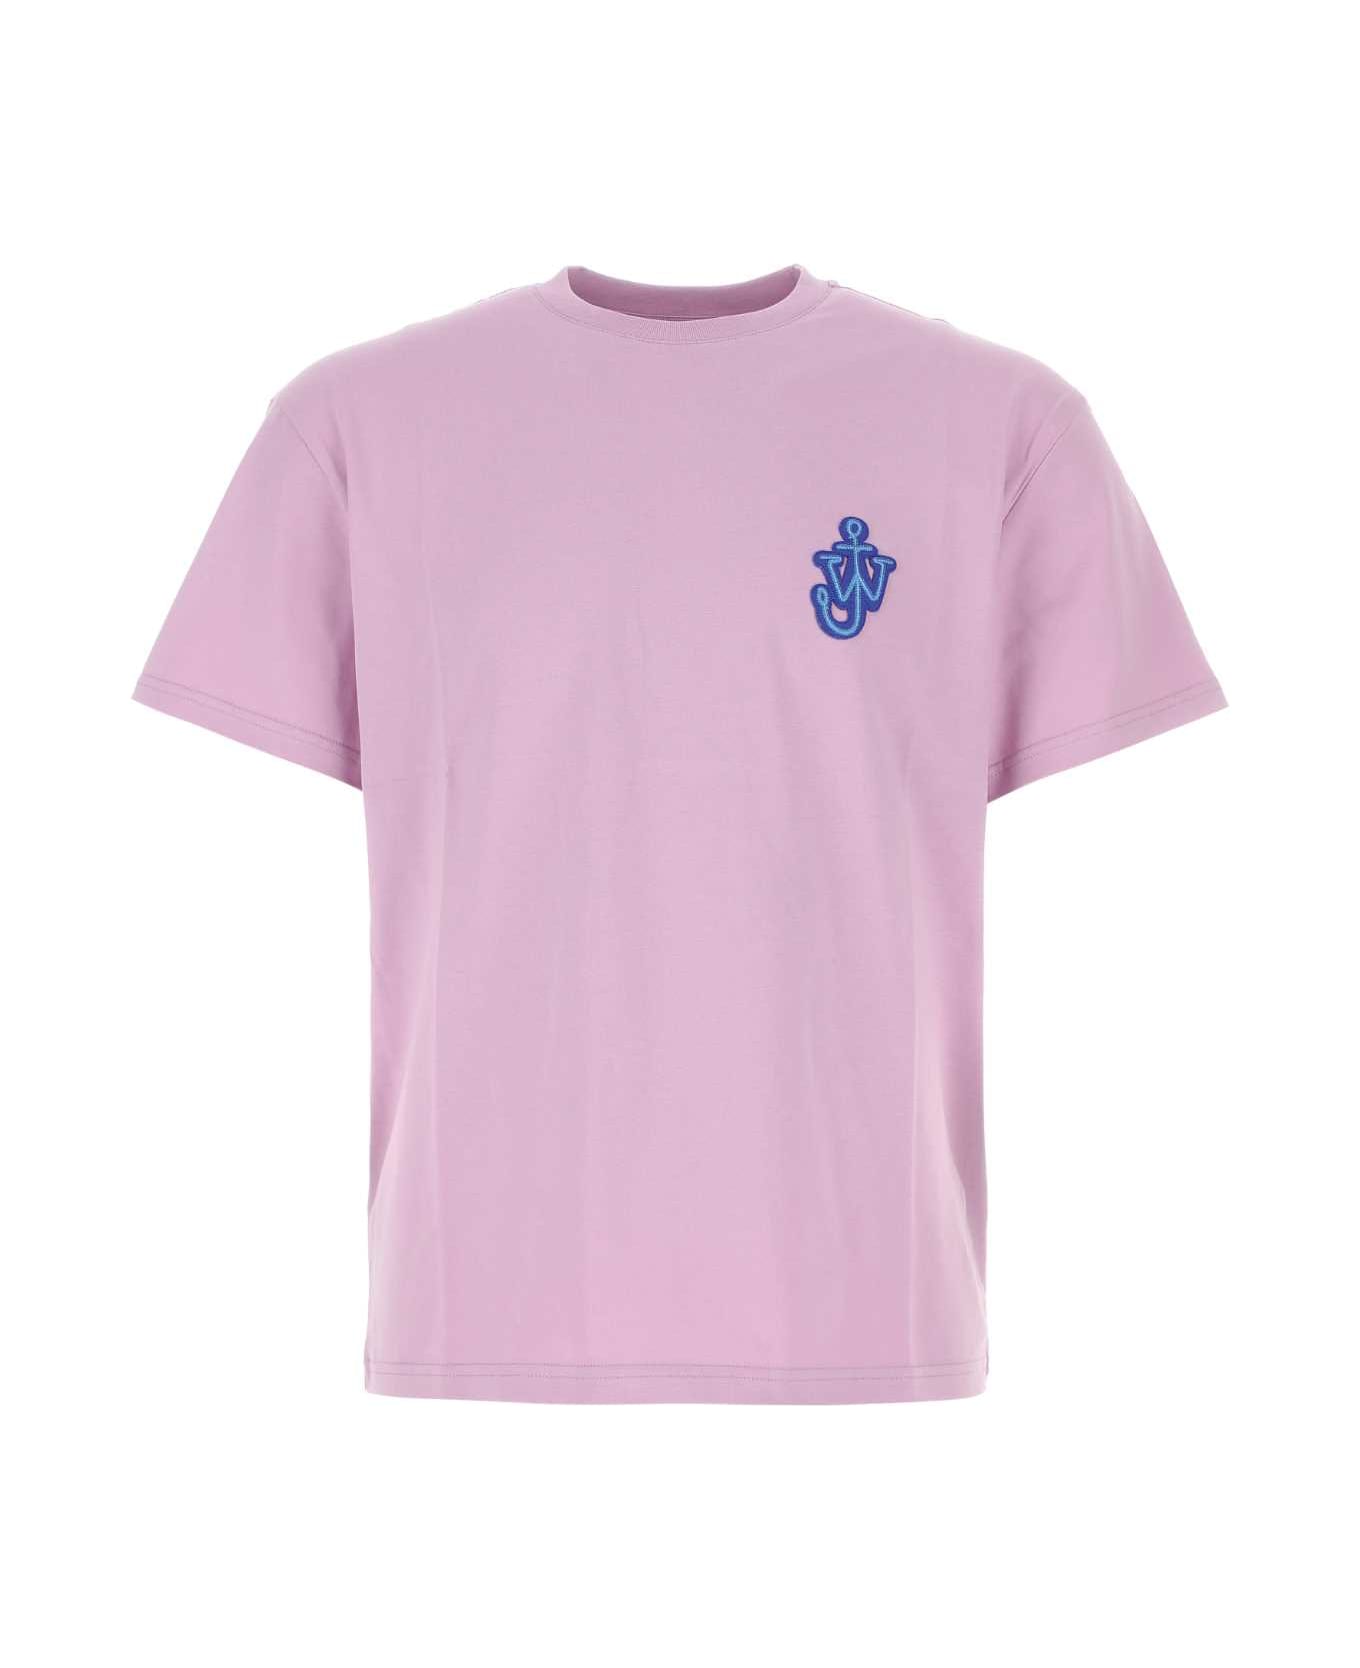 J.W. Anderson Lilac Cotton T-shirt - PINK